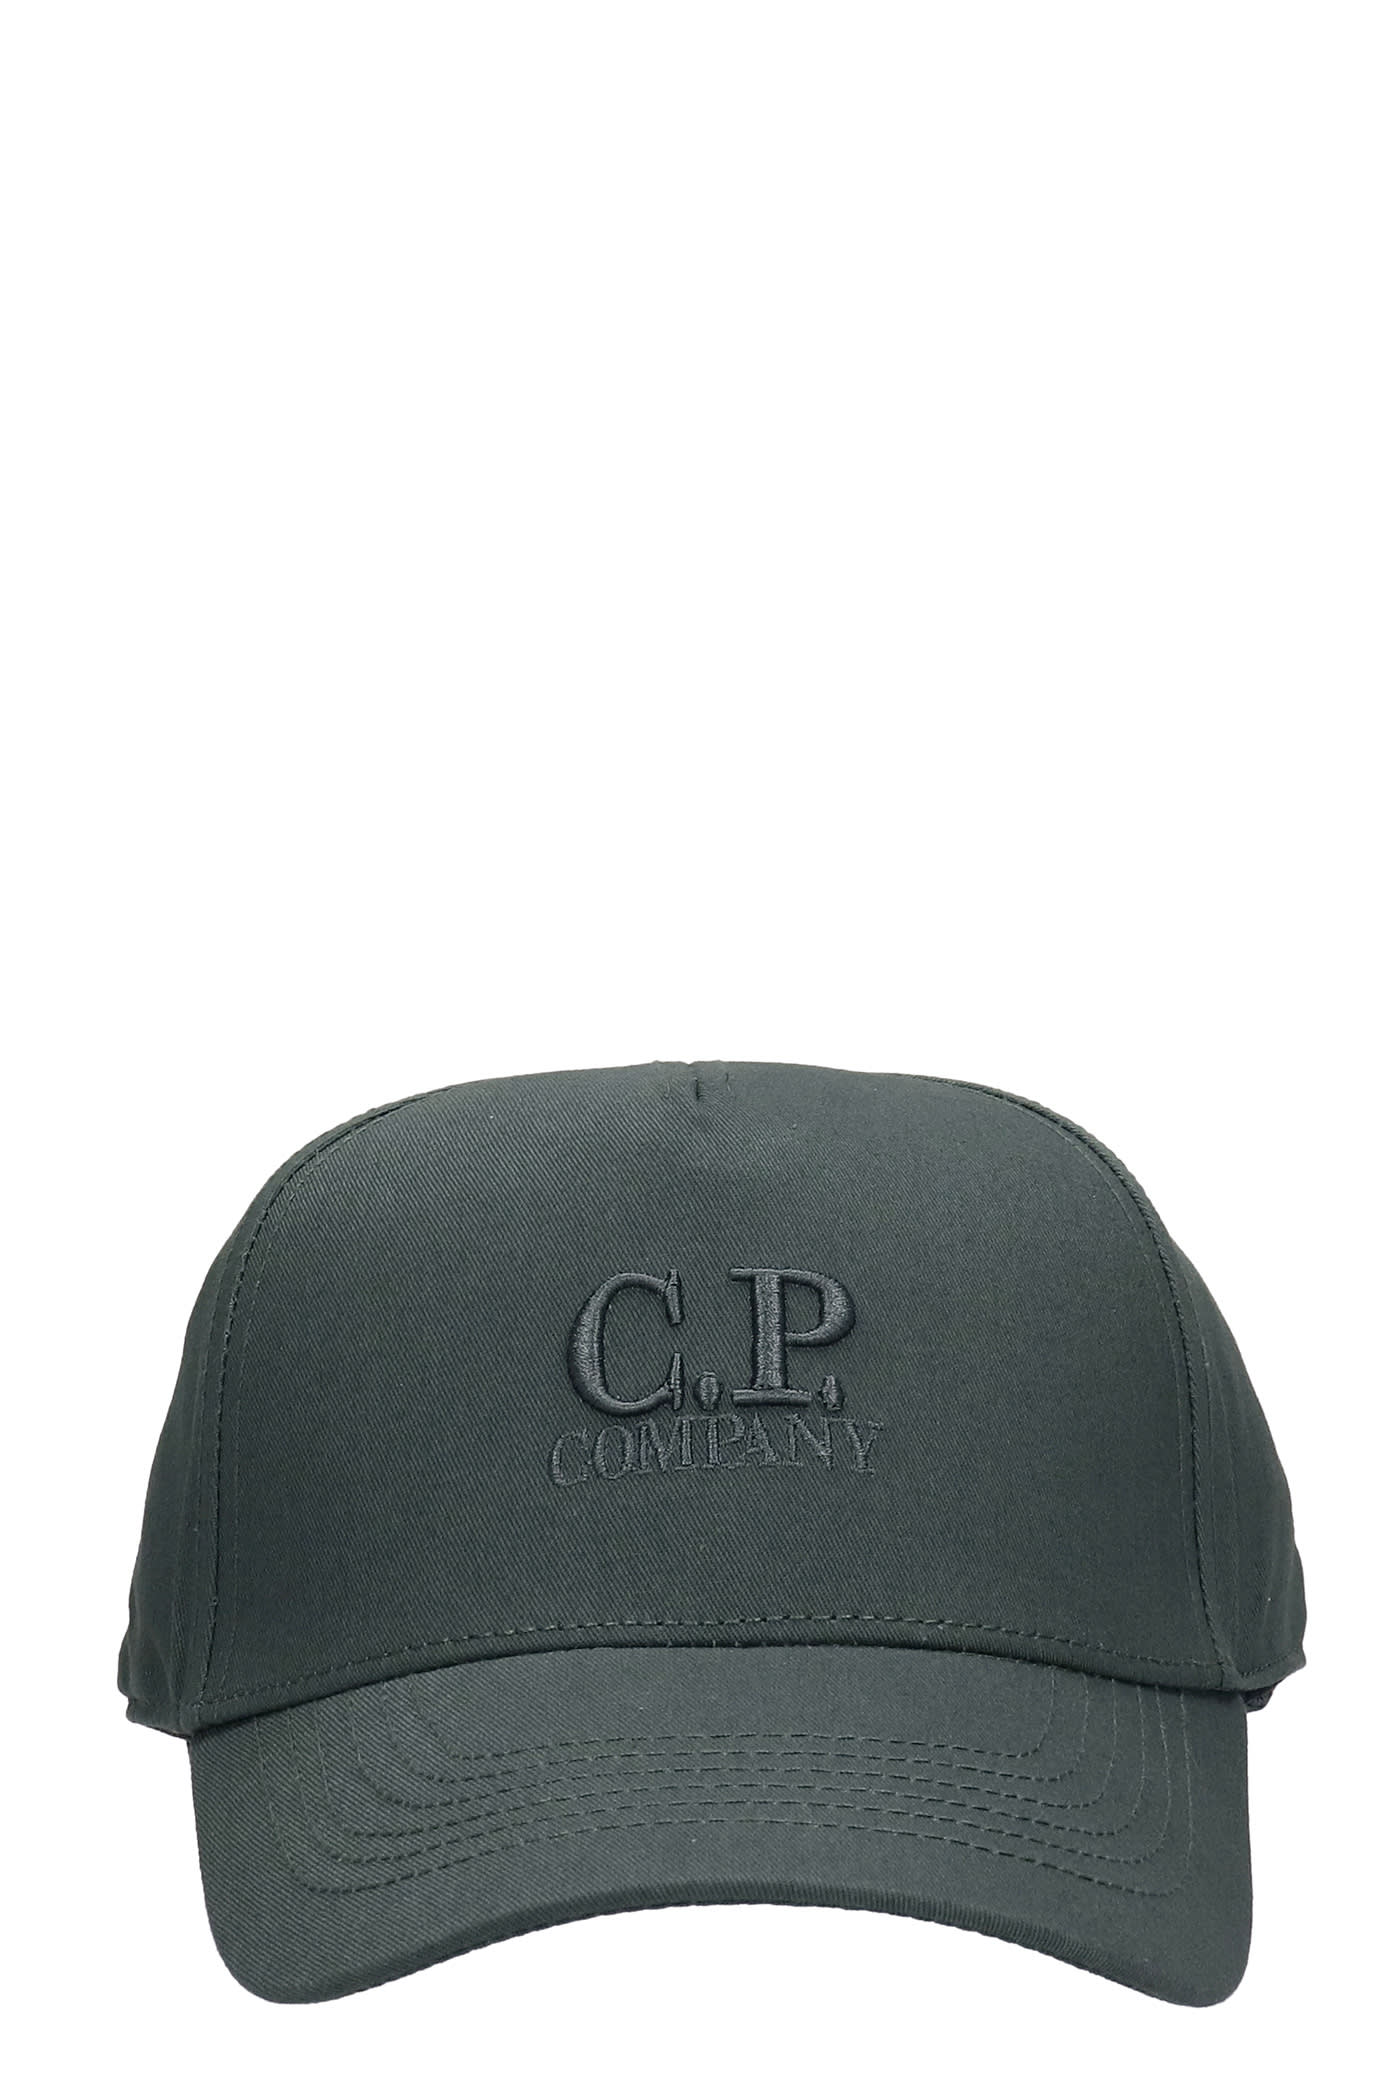 C.P. Company Hats In Green Cotton